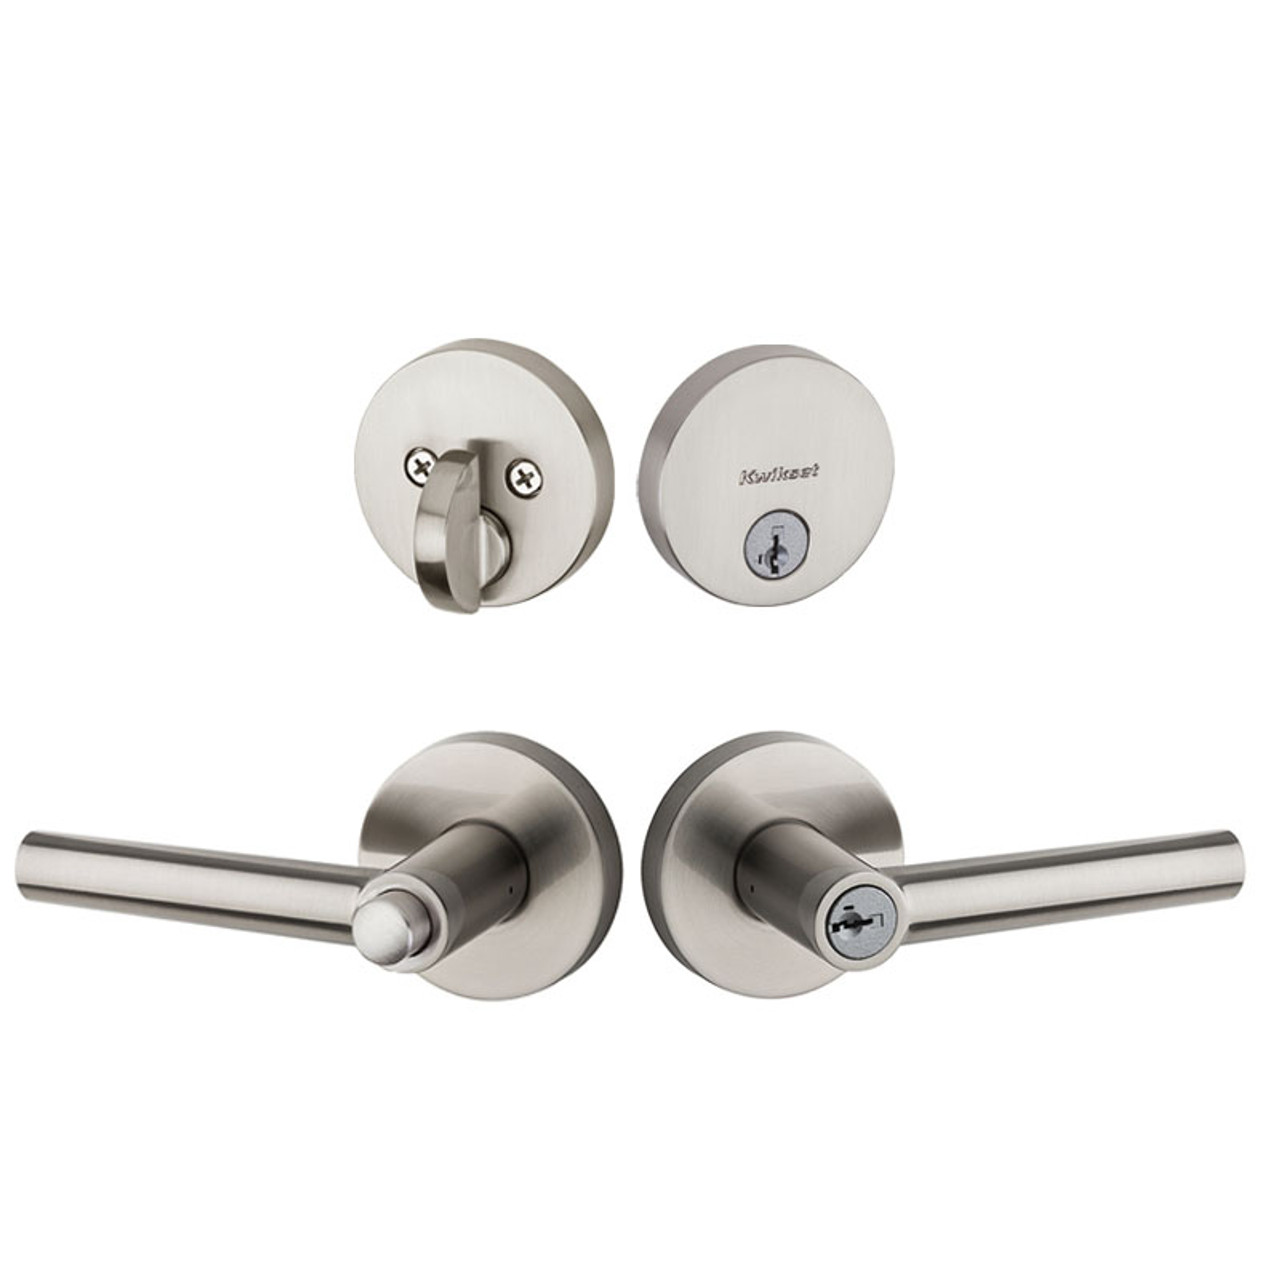 Kwikset Milan Lever Round with Single Cylinder Deadbolt Combo Pack